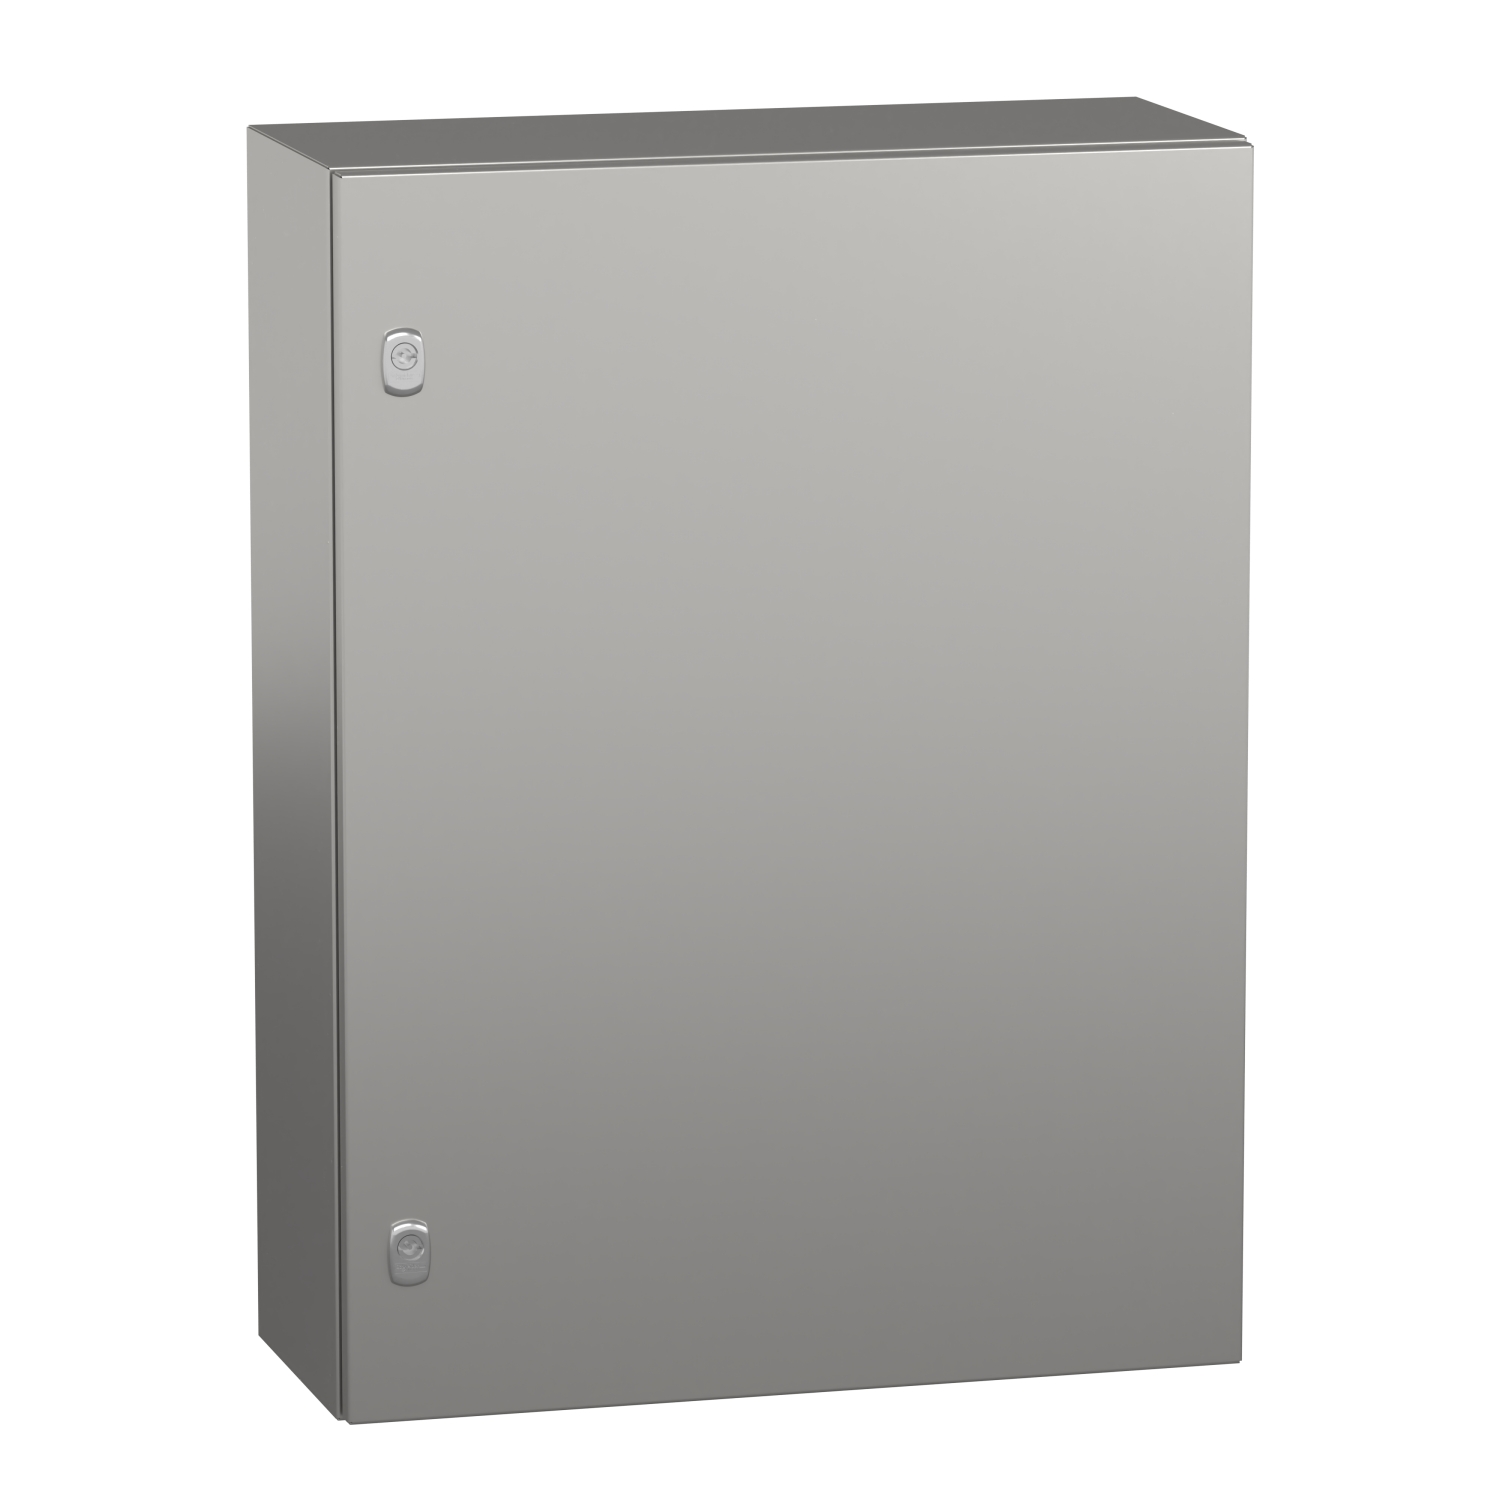 Wall mounted enclosure, Spacial S3X, stainless steel 304L, plain door, 800x600x250mm, IP66